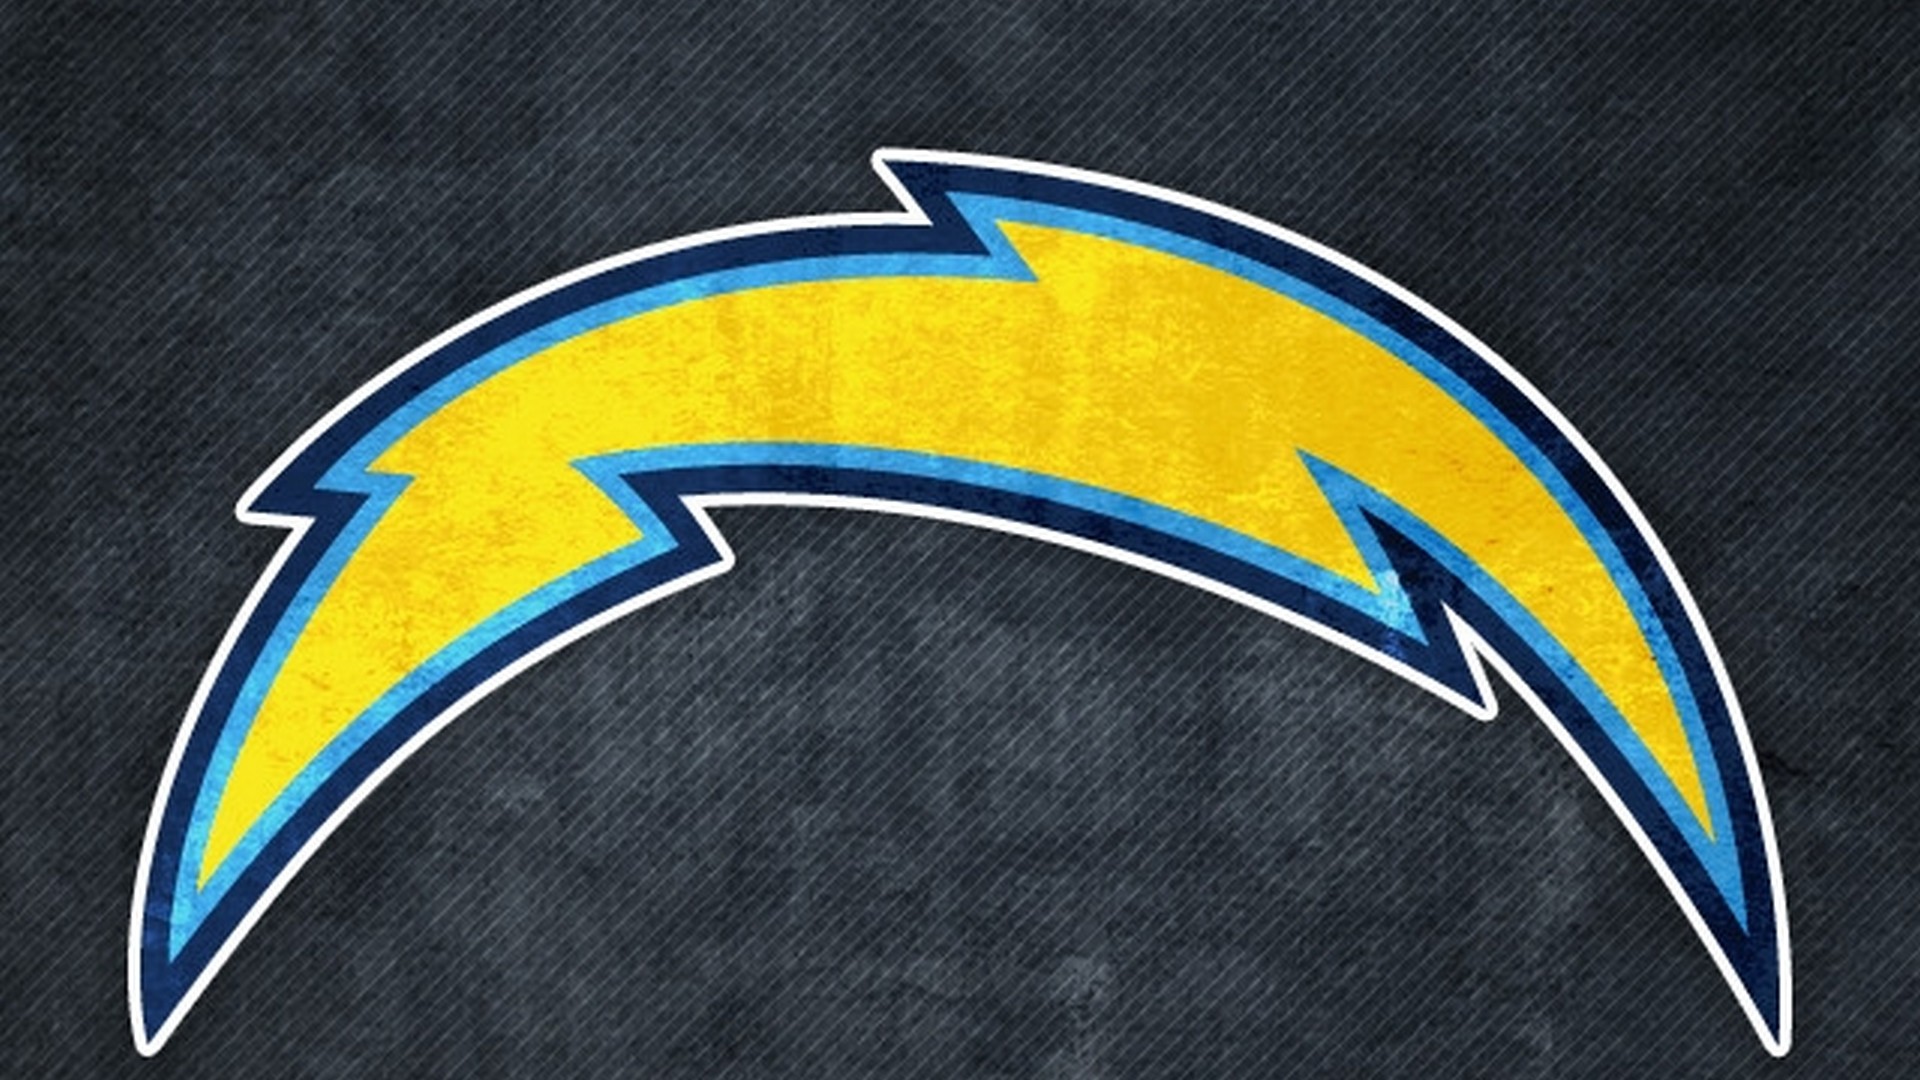 Free download Los Angeles Chargers Desktop Wallpaper 2019 NFL Football Wallpaper [1920x1080] for your Desktop, Mobile & Tablet. Explore Chargers Background. SD Chargers Wallpaper, Chargers Wallpaper iPhone, Chargers Background